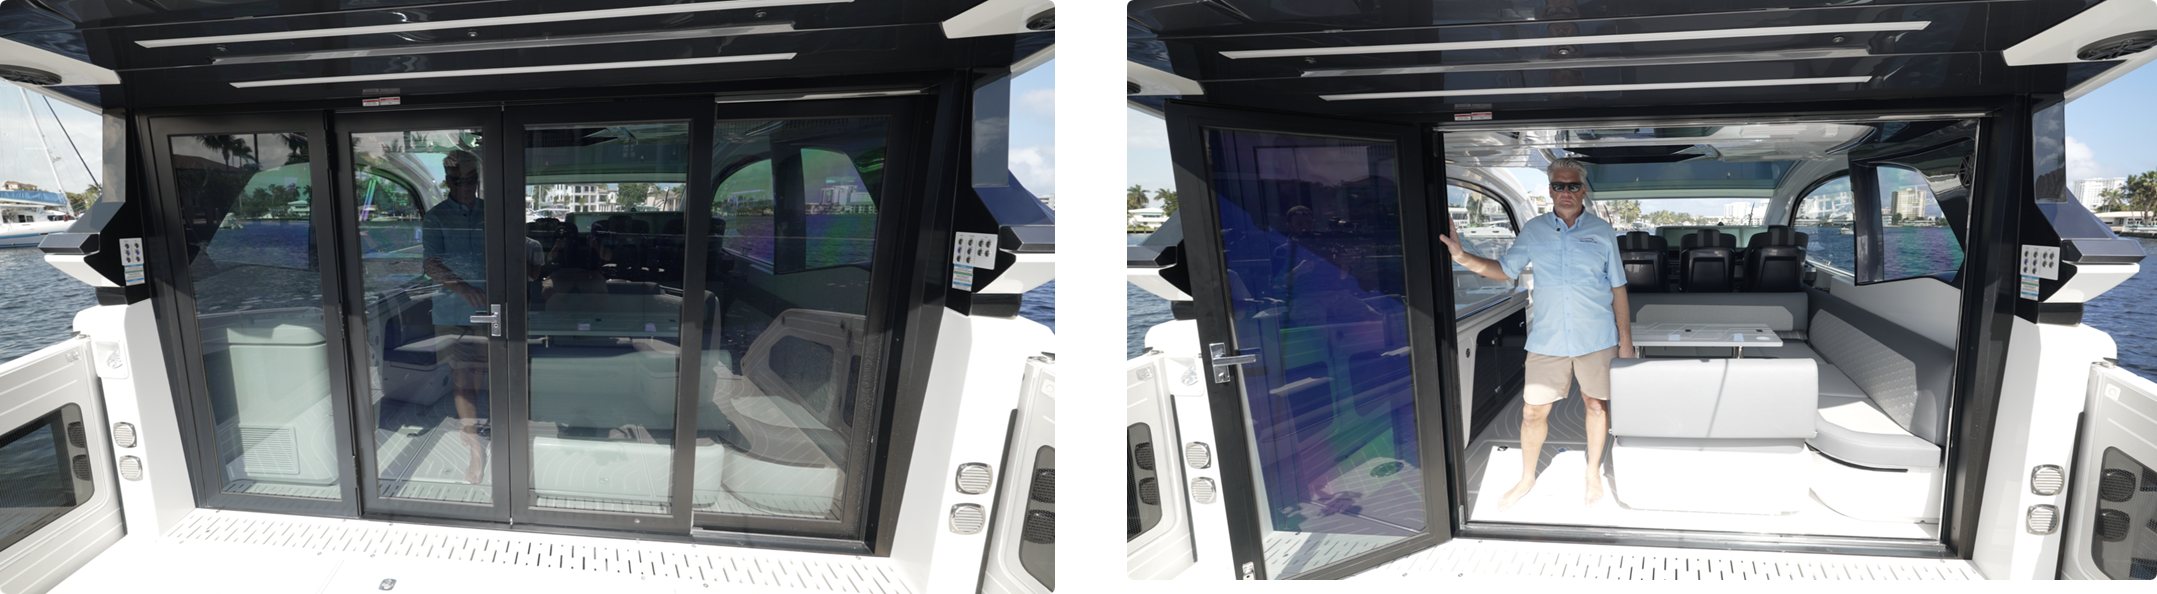 Galeon 435 GTO Salon doors in the closed and open configurations